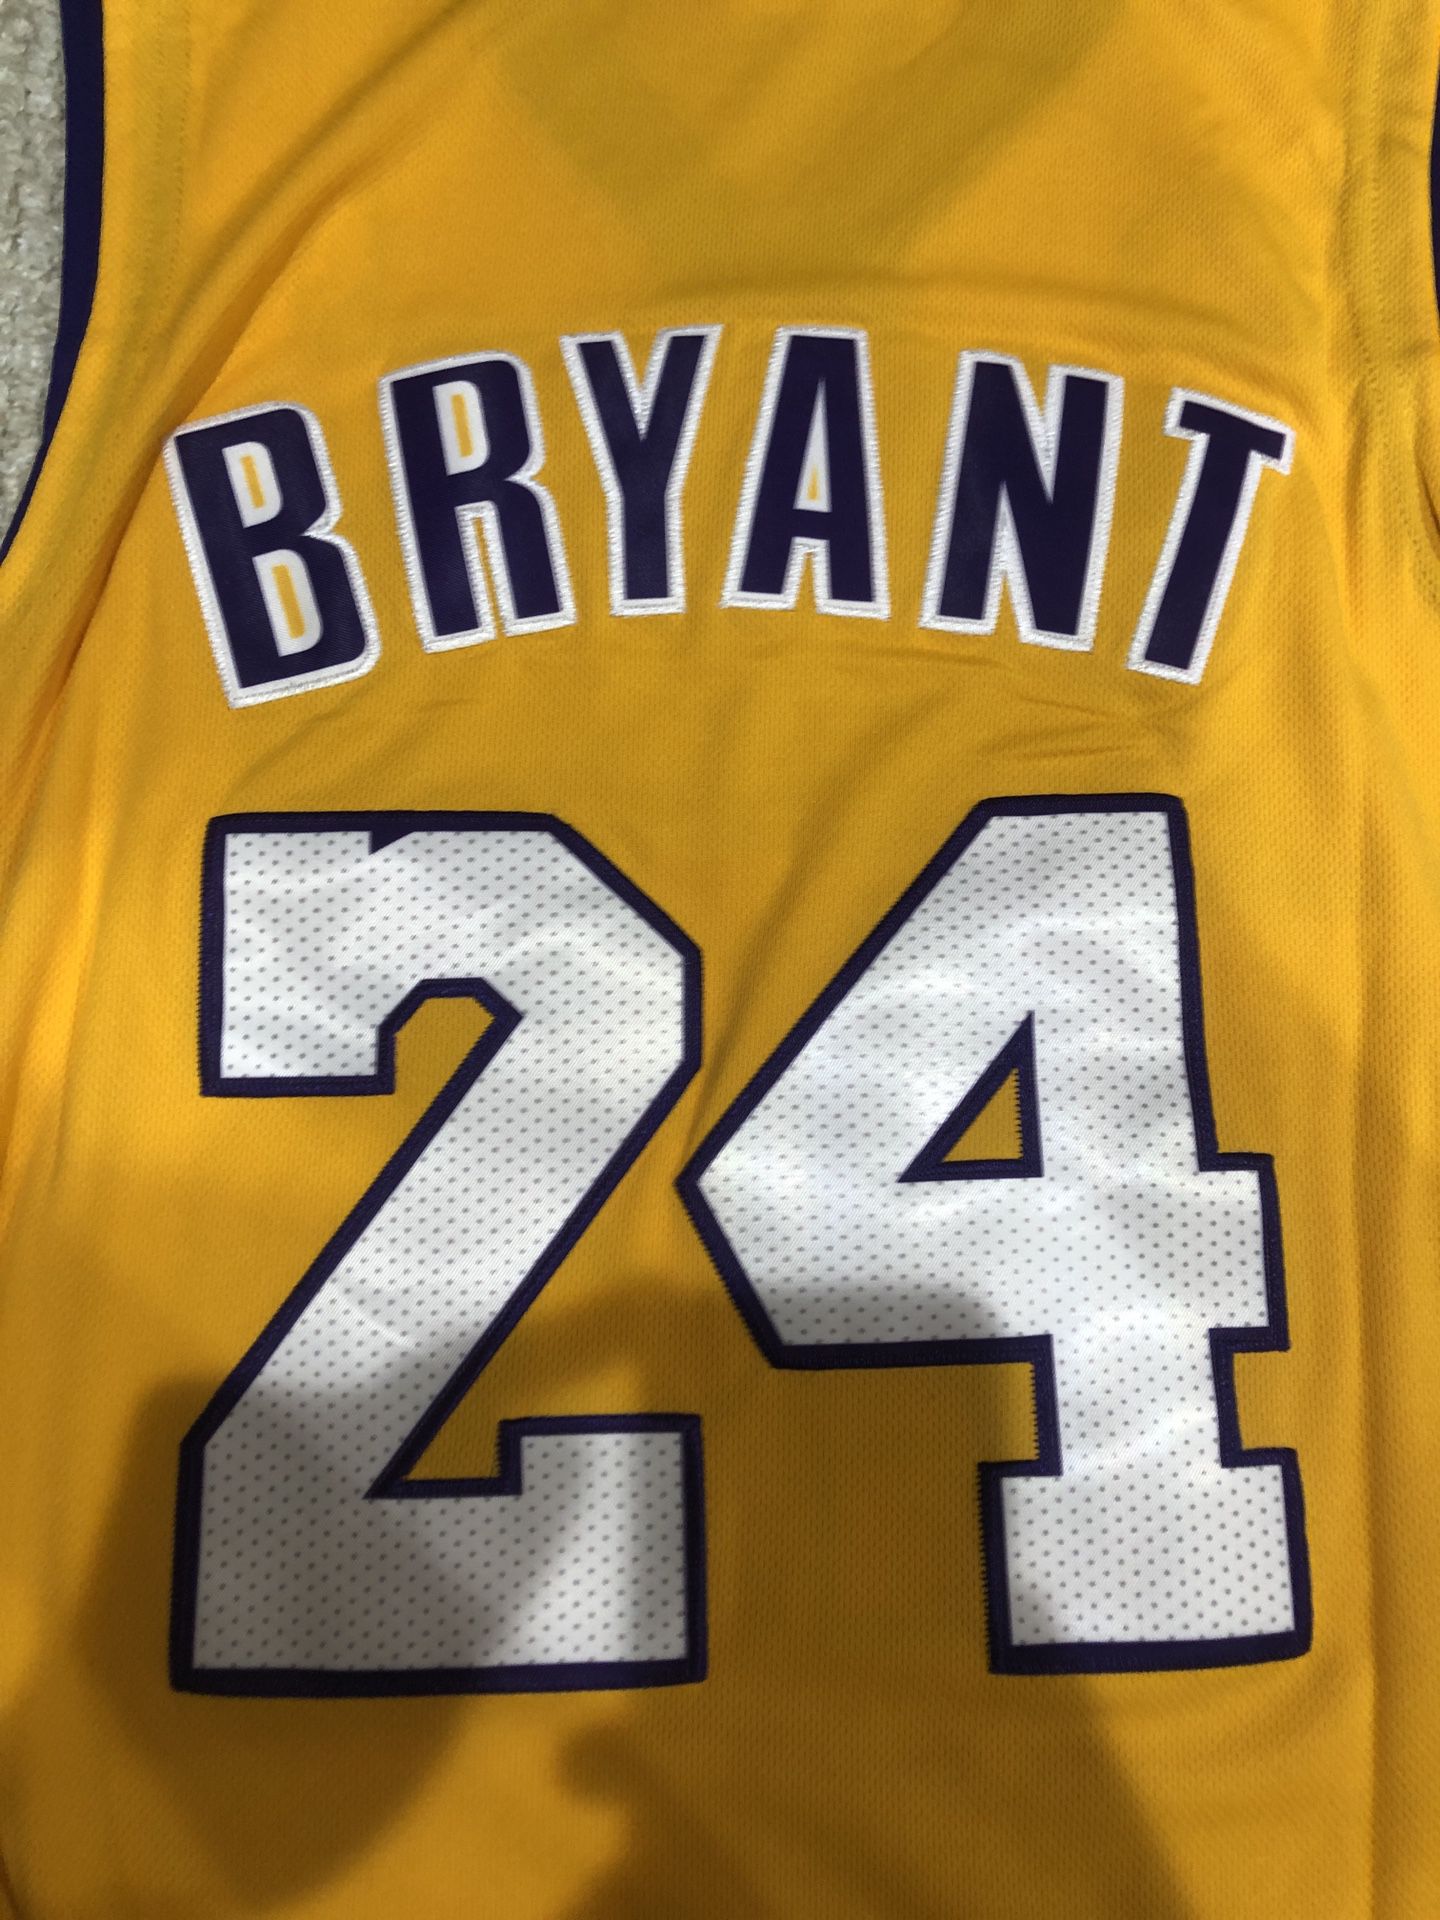 Vintage NBA Jersey Kobe Bryant Jersey champion 44 Los Angeles Lakers Jersey  Gem for Sale in Huntington Park, CA - OfferUp